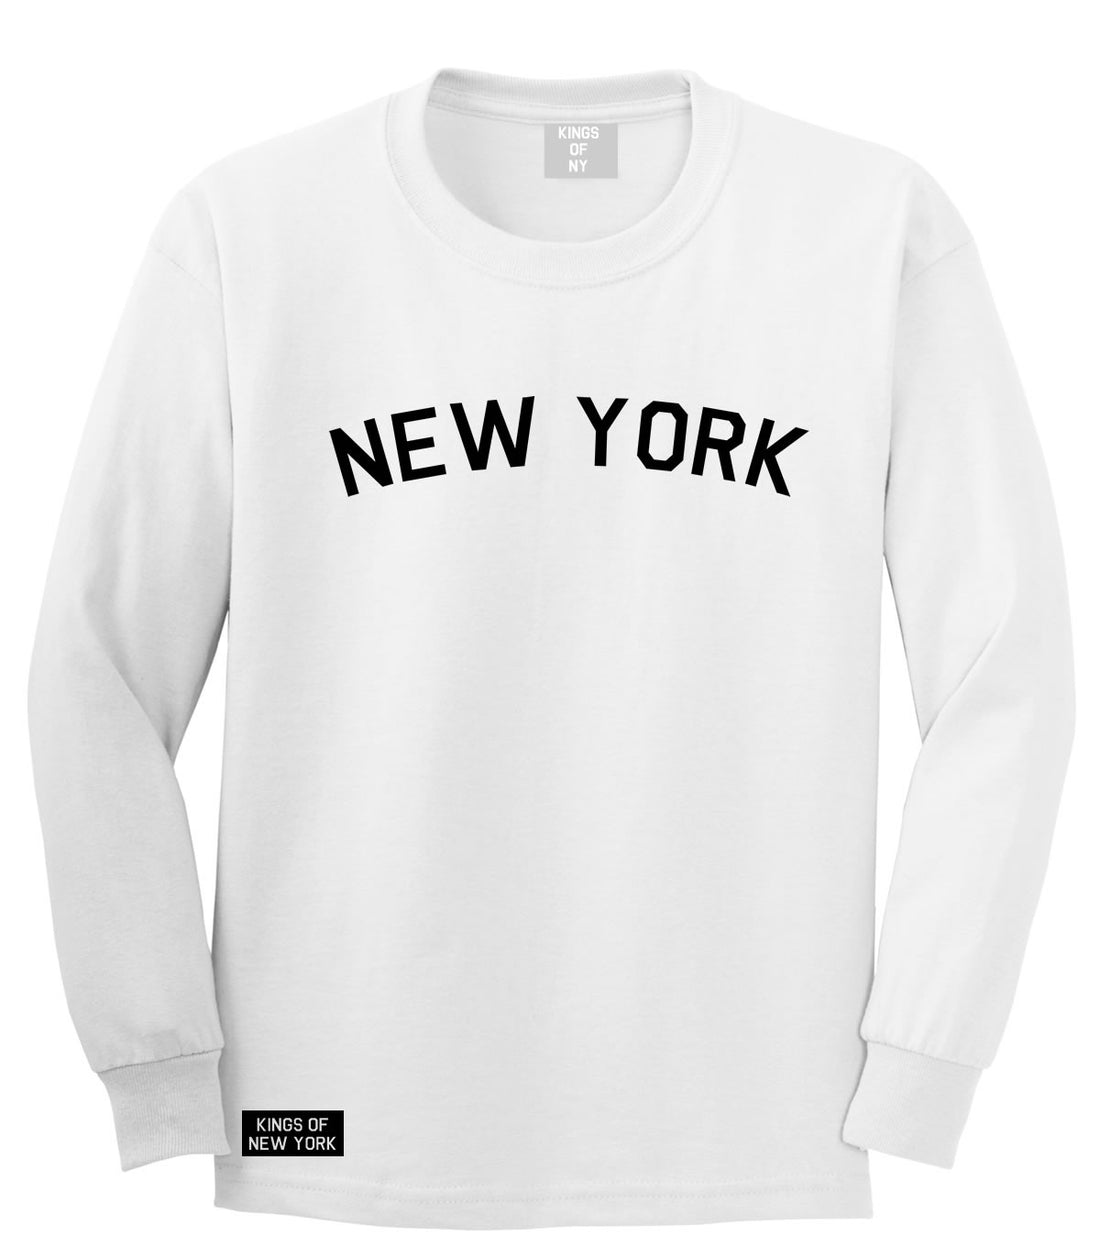 New York Arch Long Sleeve T-Shirt in White by Kings Of NY